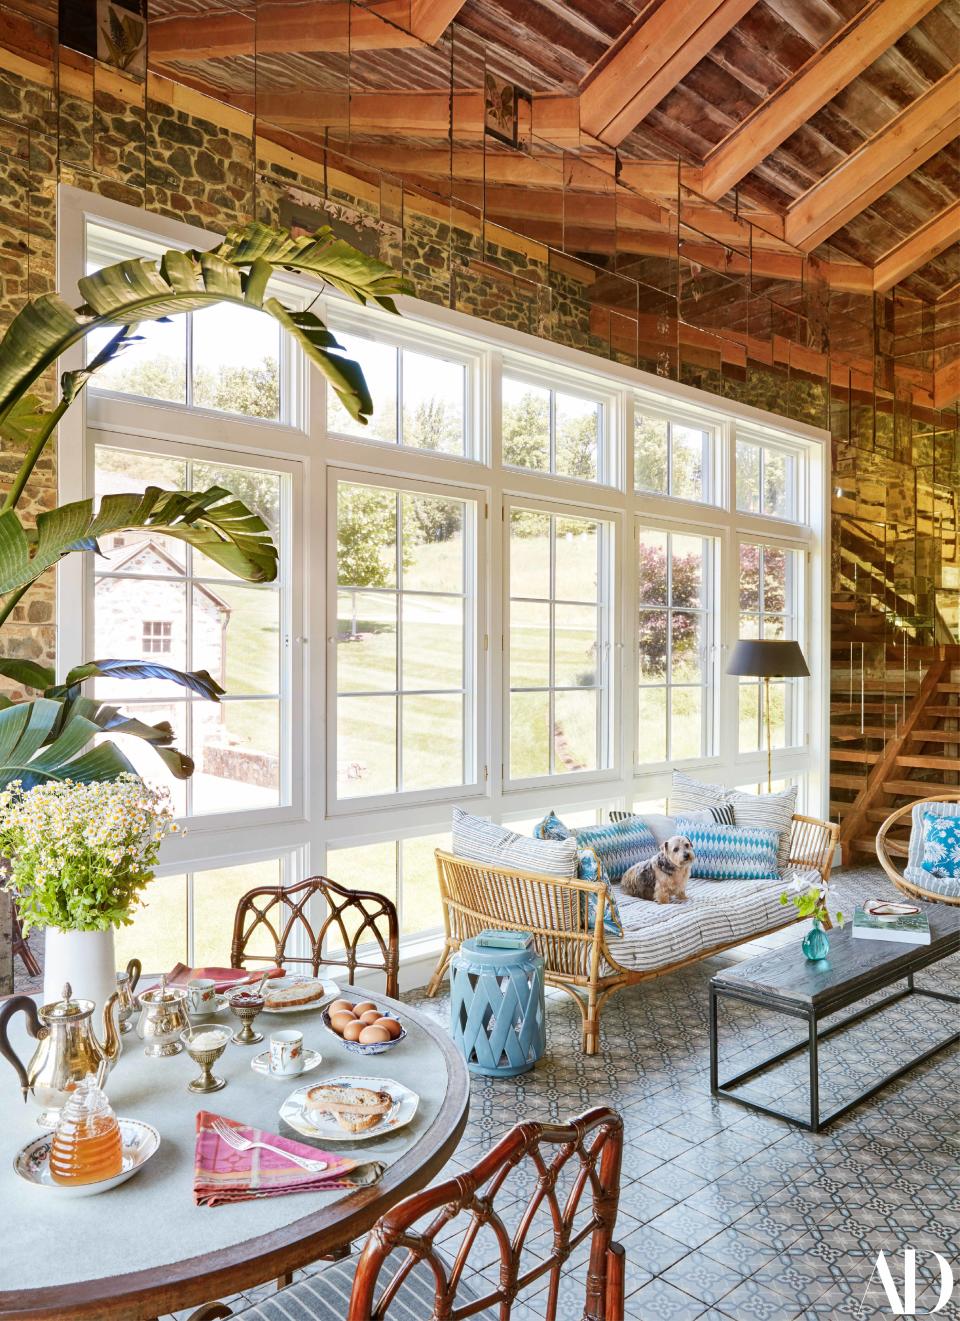 In the sunroom, the dining chairs, bamboo seating, and floor tiles are family heirlooms.